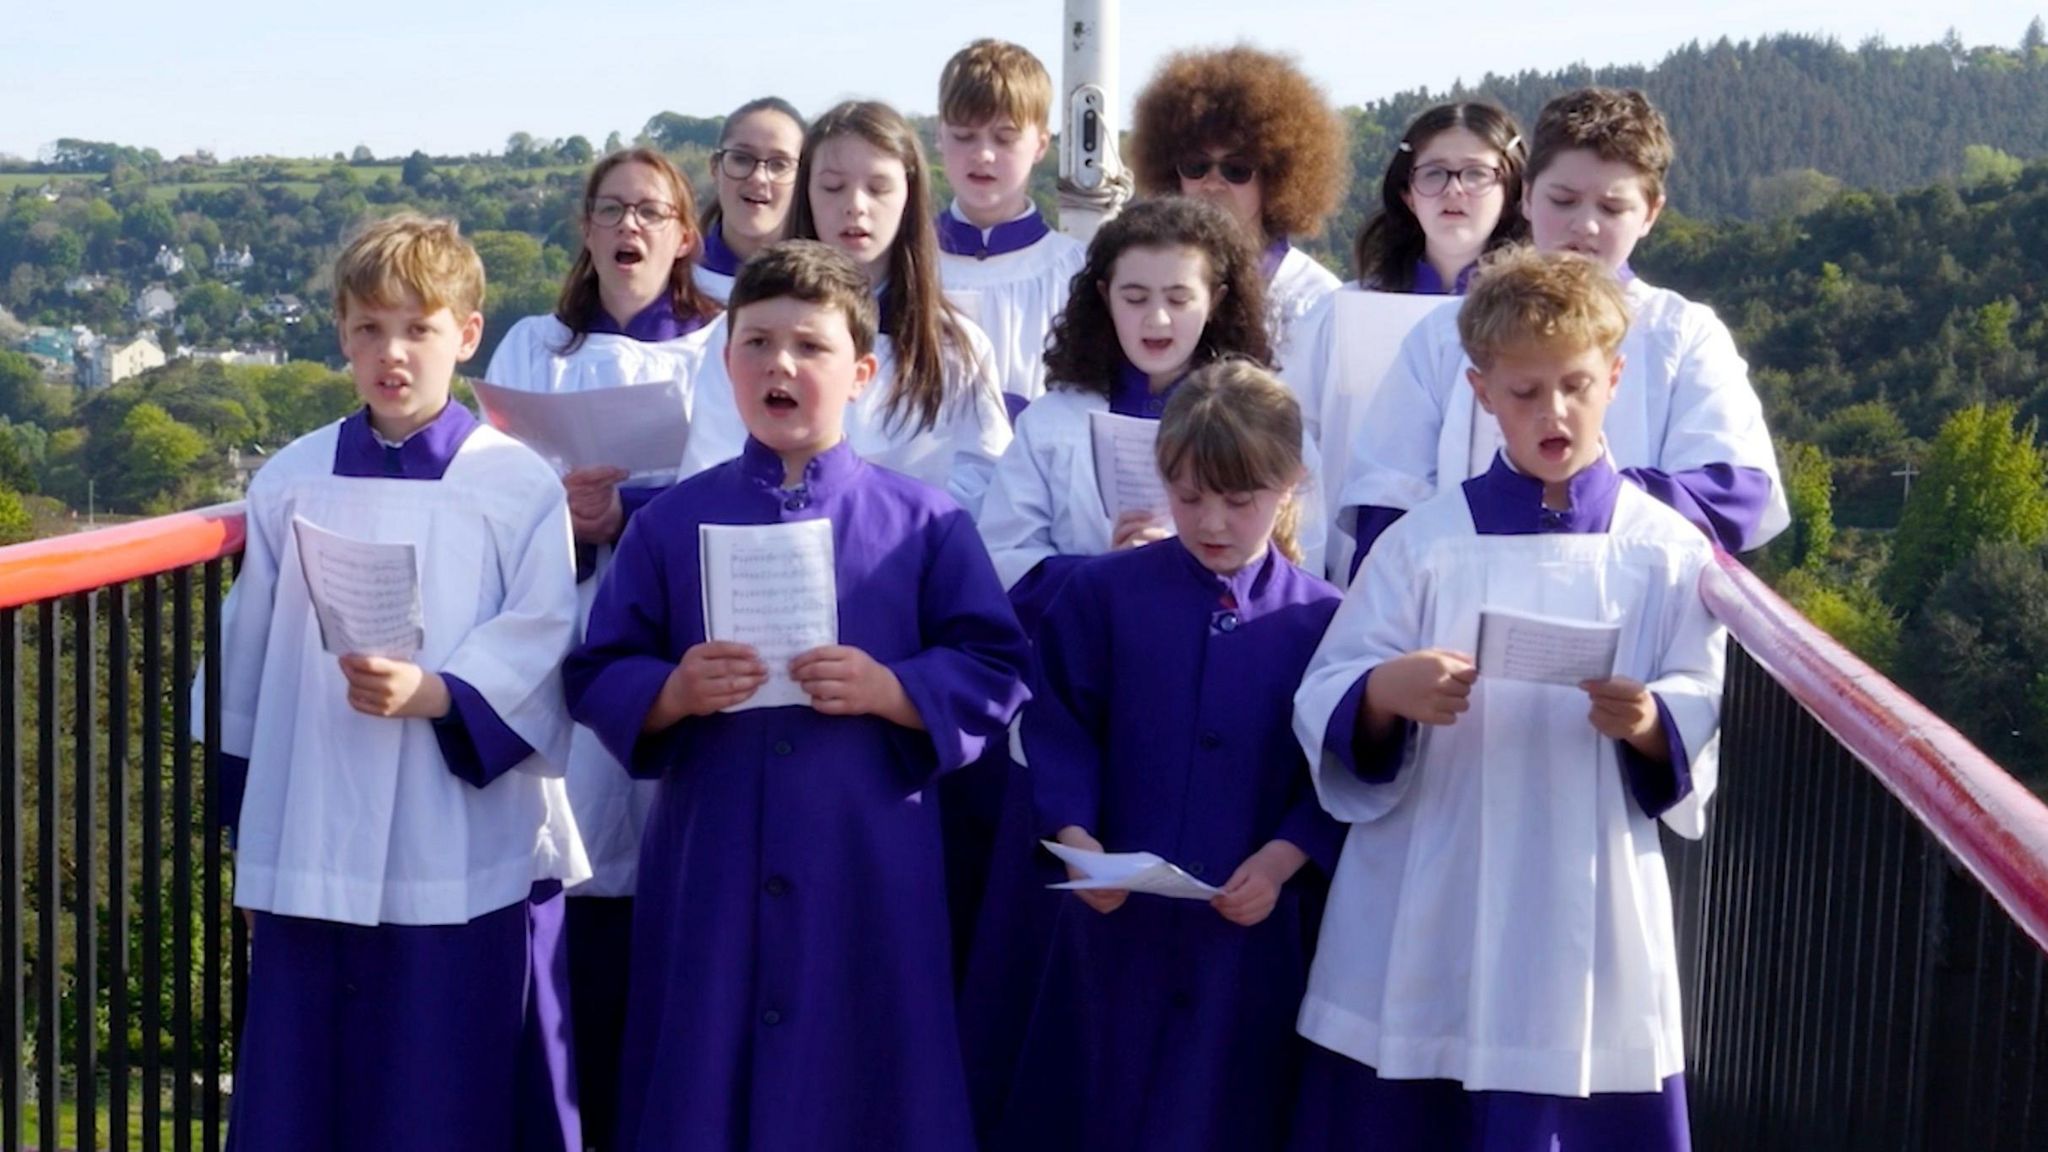 The choristers singing atop the Laxey Wheel 